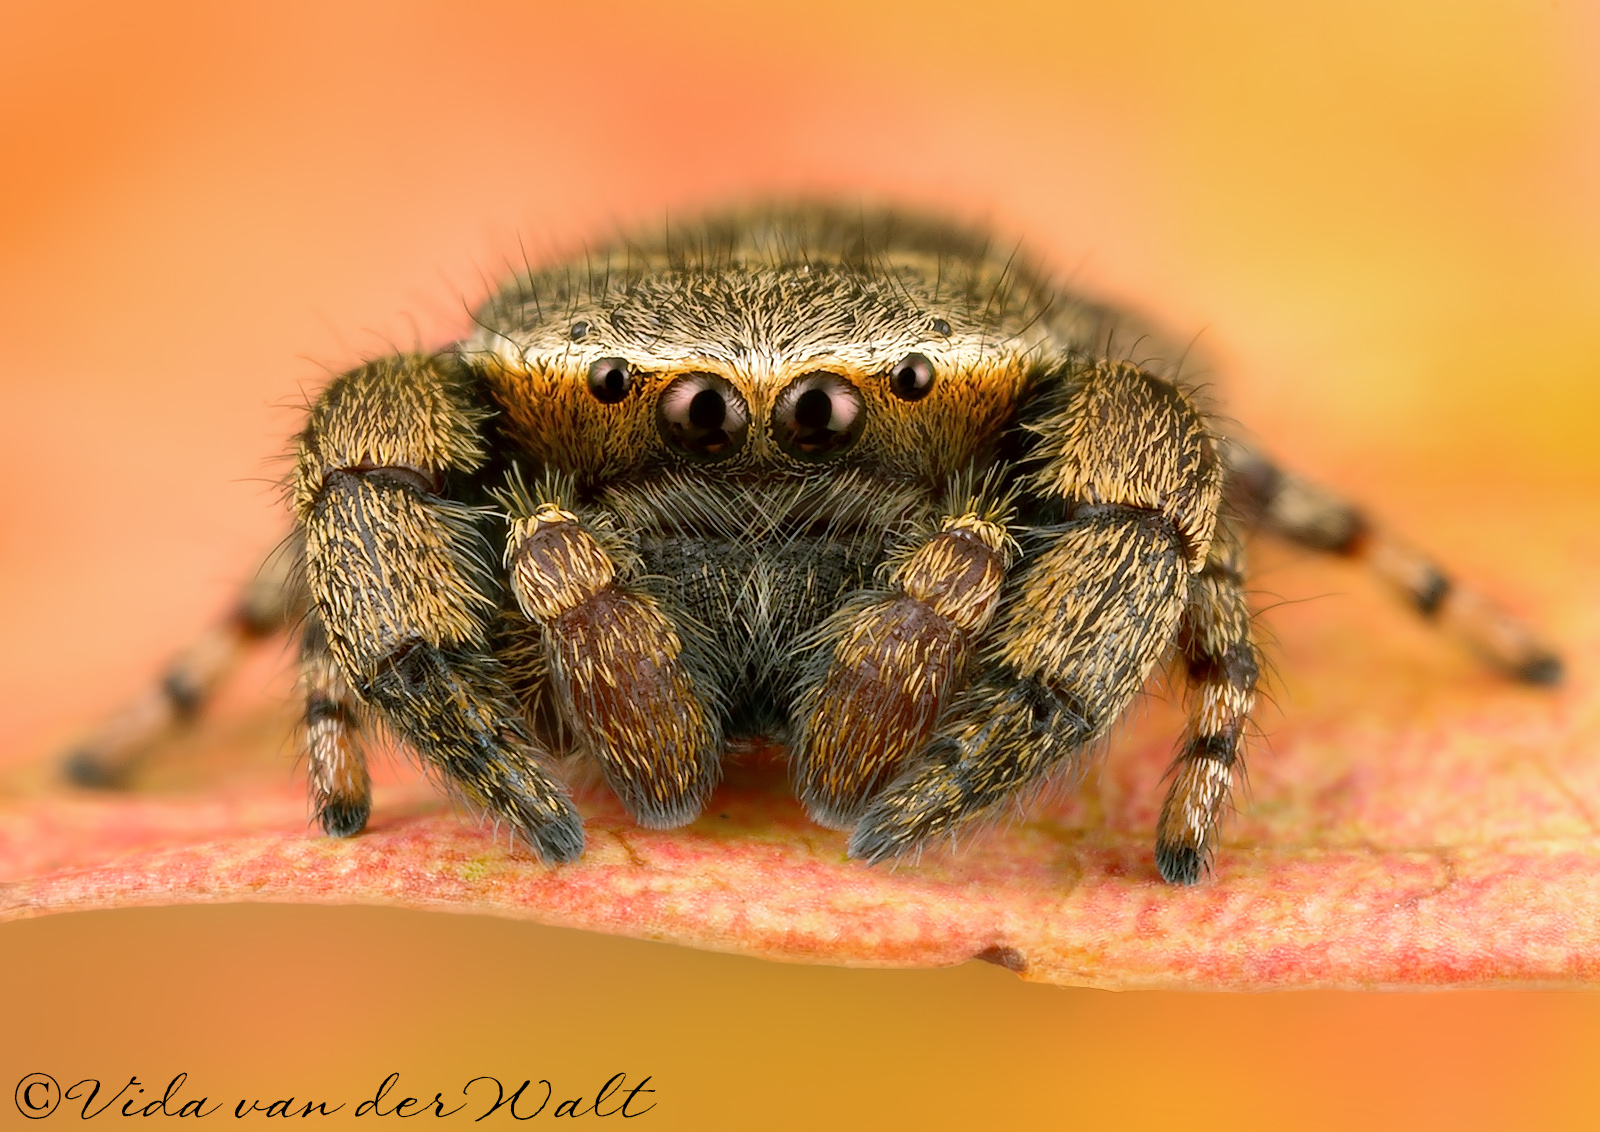 http://www.jumpingspiders.co.za/images/main/340.jpg